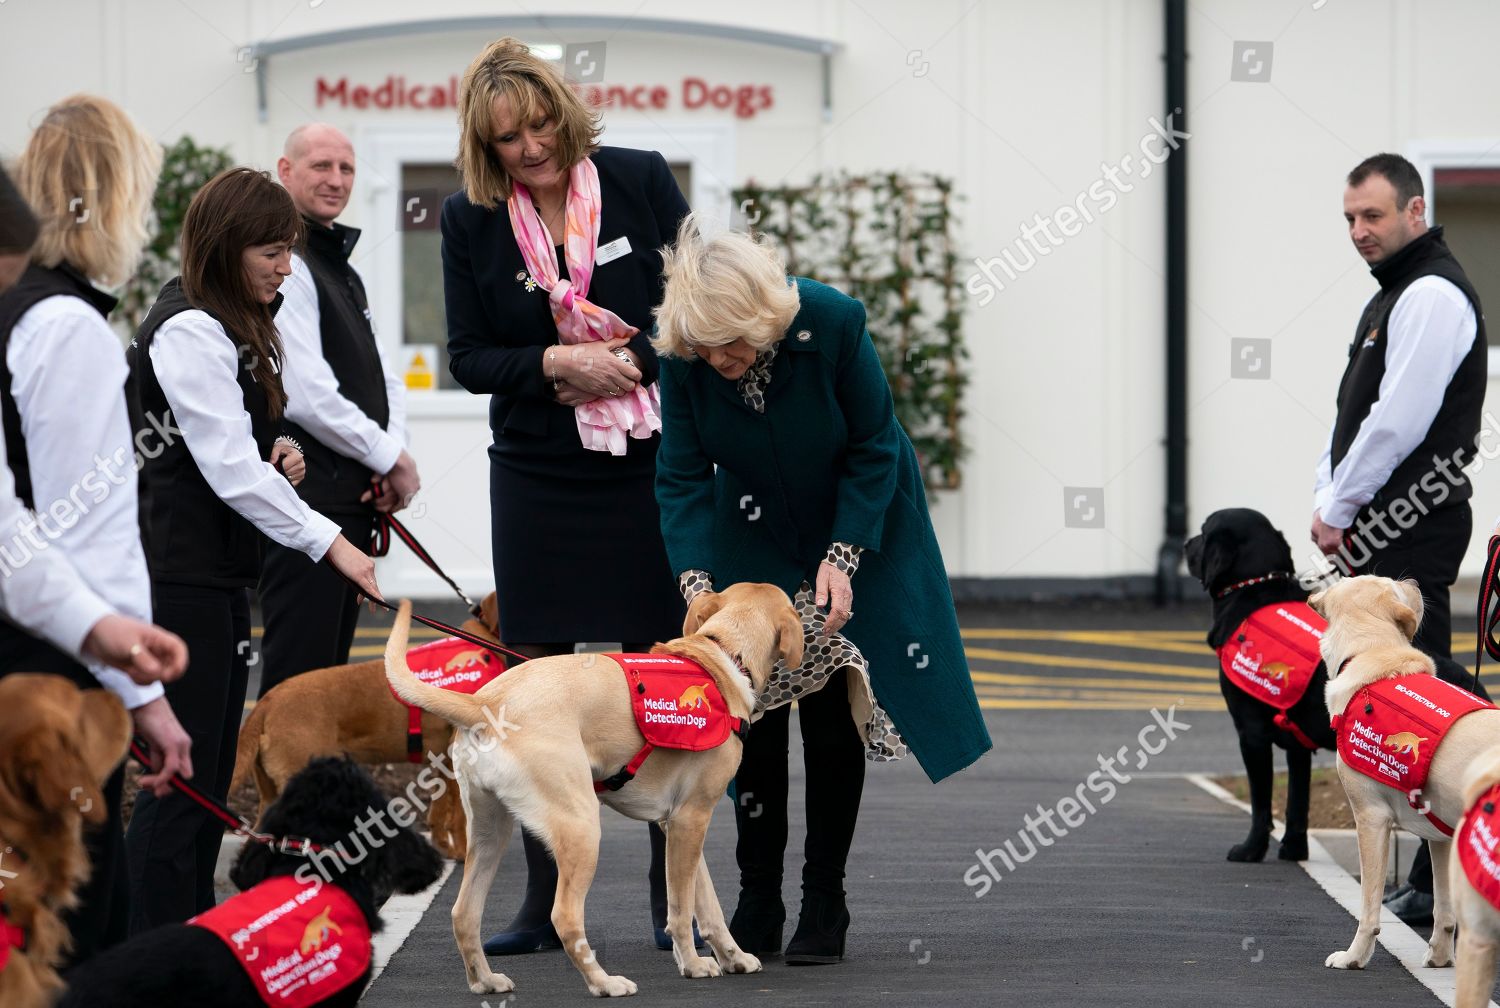 duchess-of-cornwall-opens-medical-detection-dogs-facility-london-united-kingdom-shutterstock-editorial-10112585d.jpg